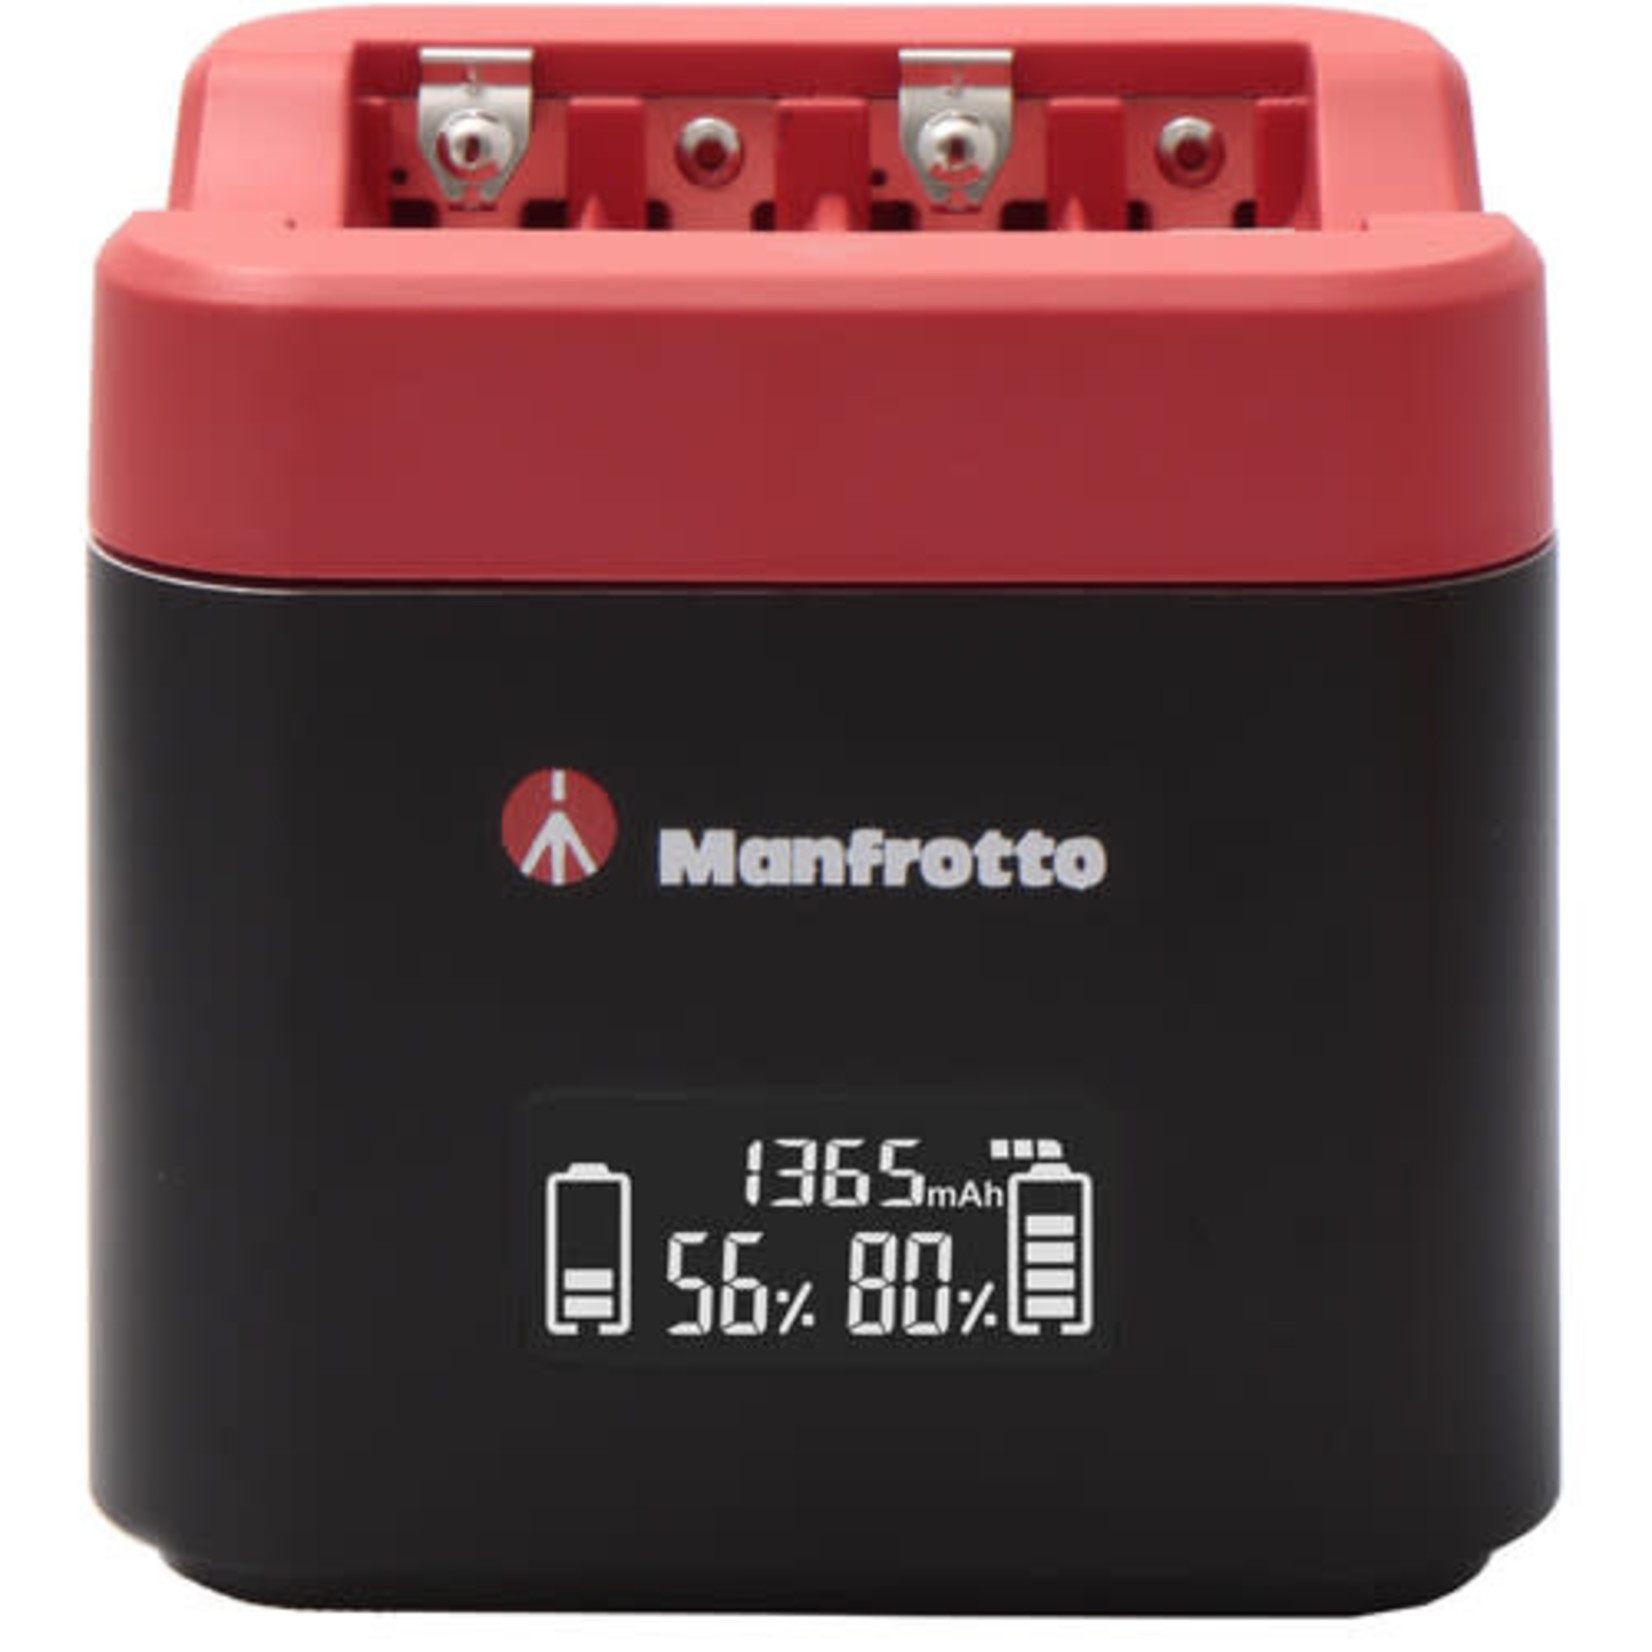 Manfrotto Manfrotto Pro Cube for Sony Batteries